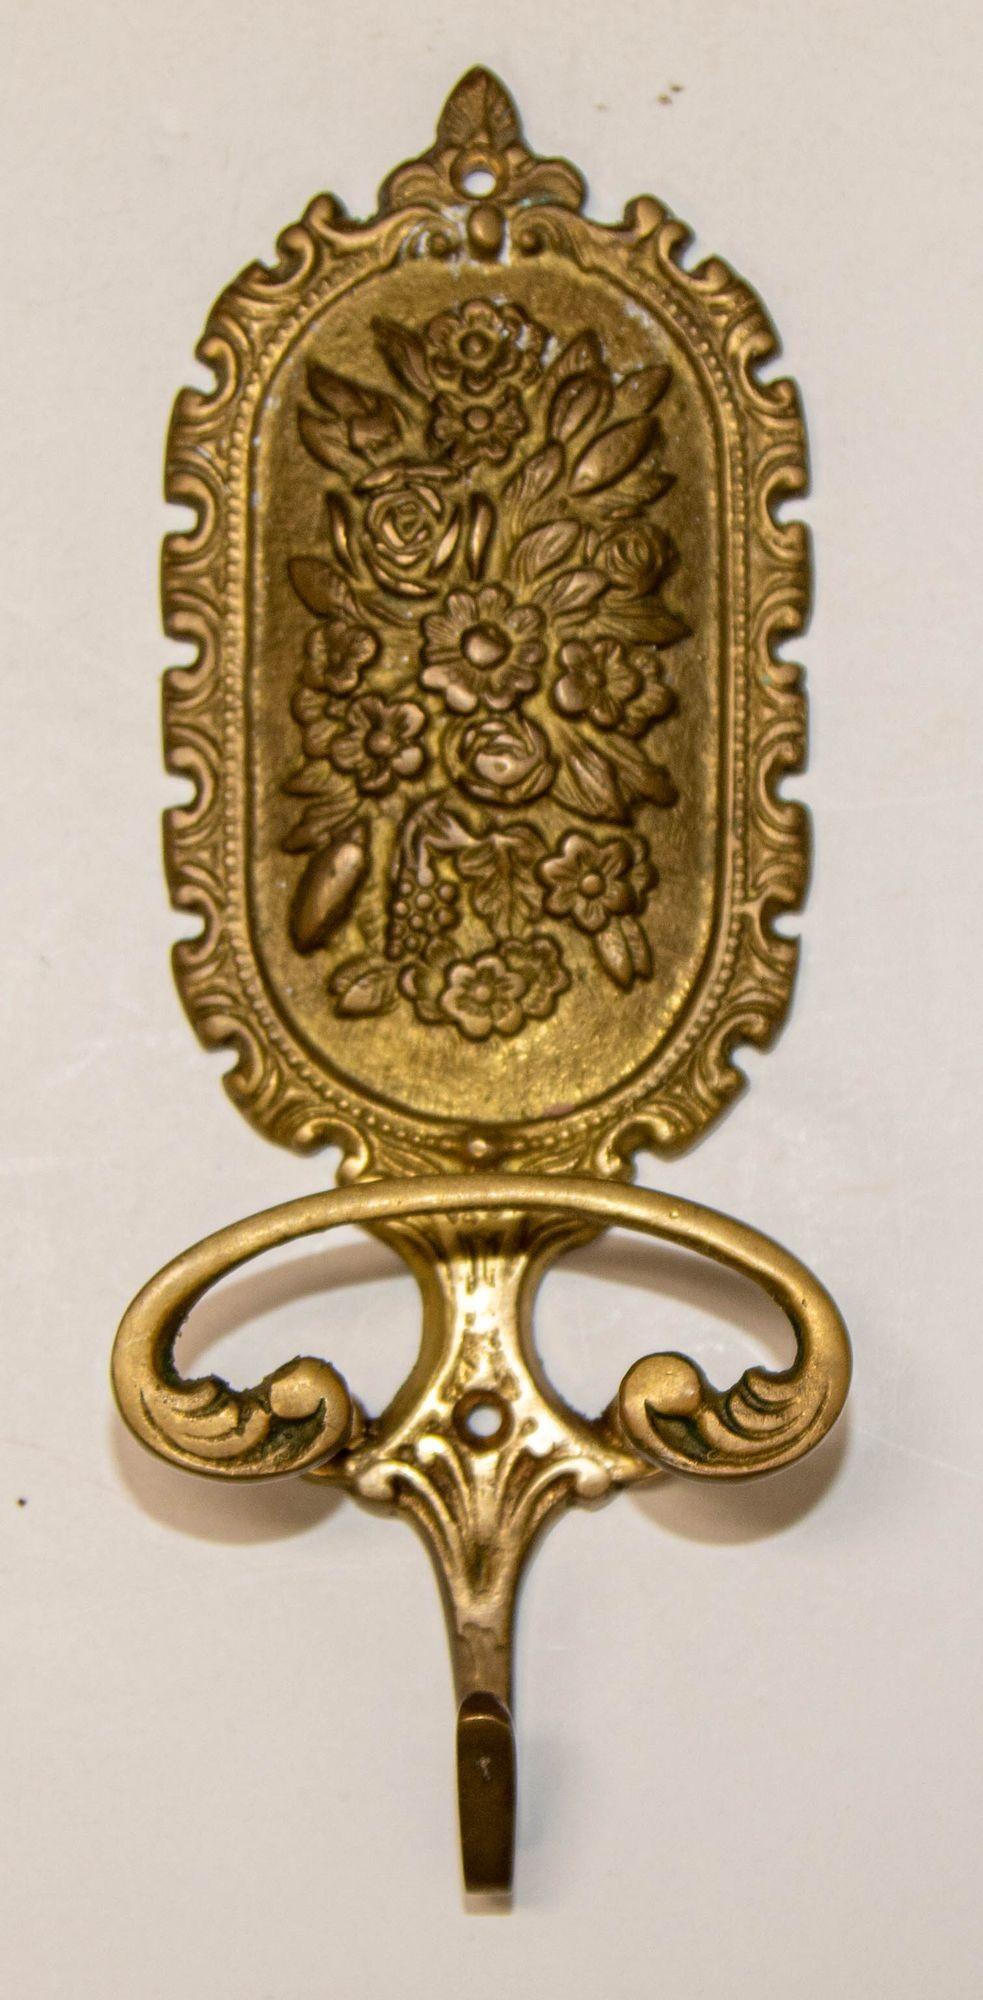 Architectural Italian Cast Brass Floral Wall Hook Decor Made in Italy 7